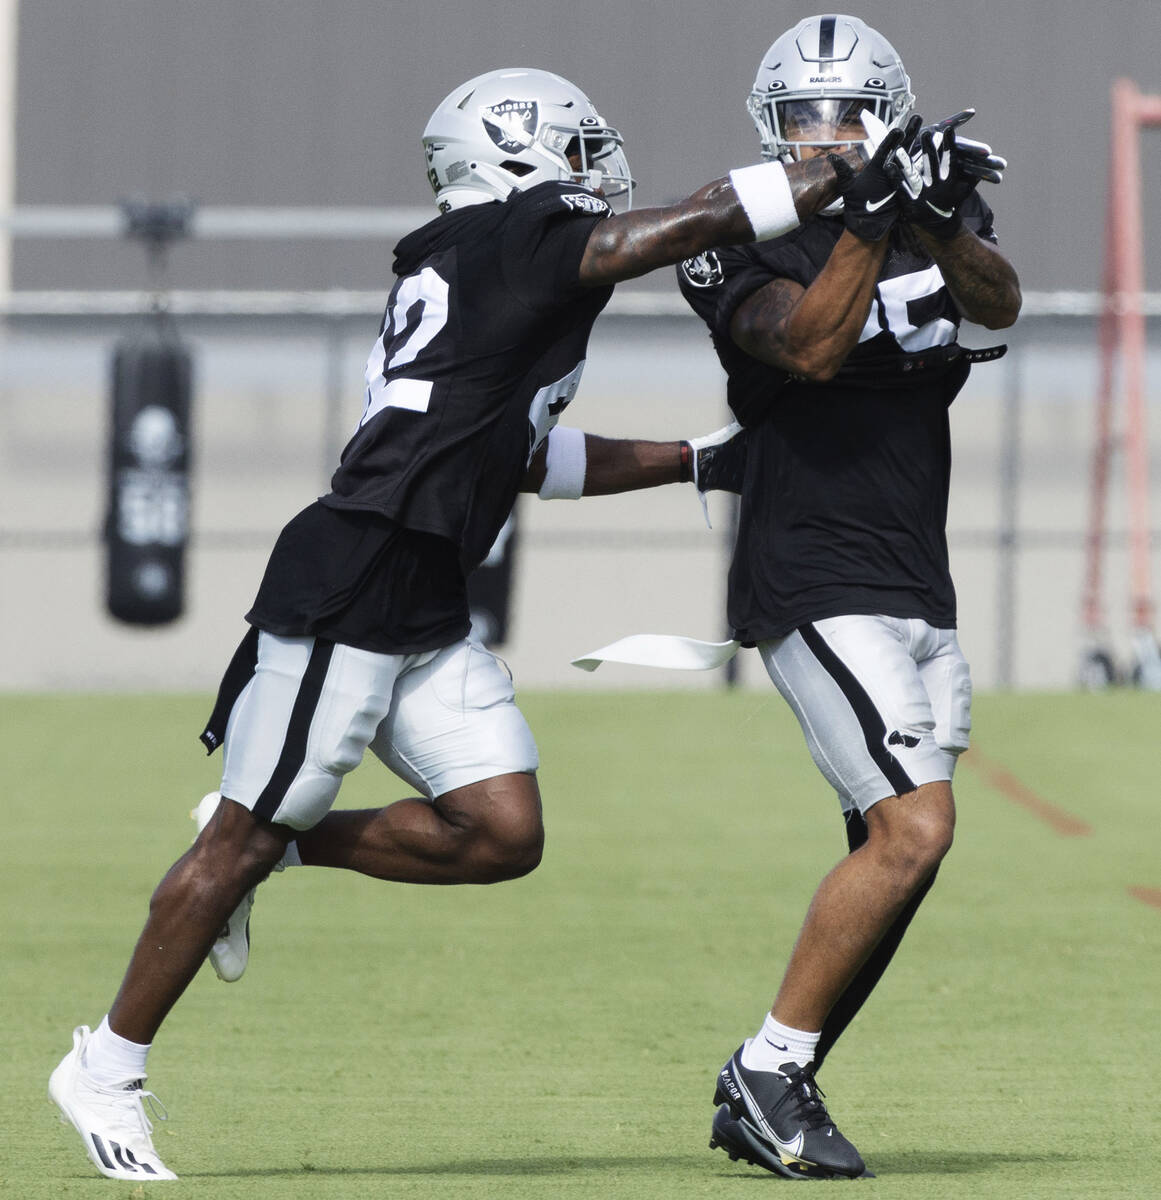 Raiders safety Qwynnterrio Cole (42) works with safety Tre'von Moehrig (25) during a drill at t ...